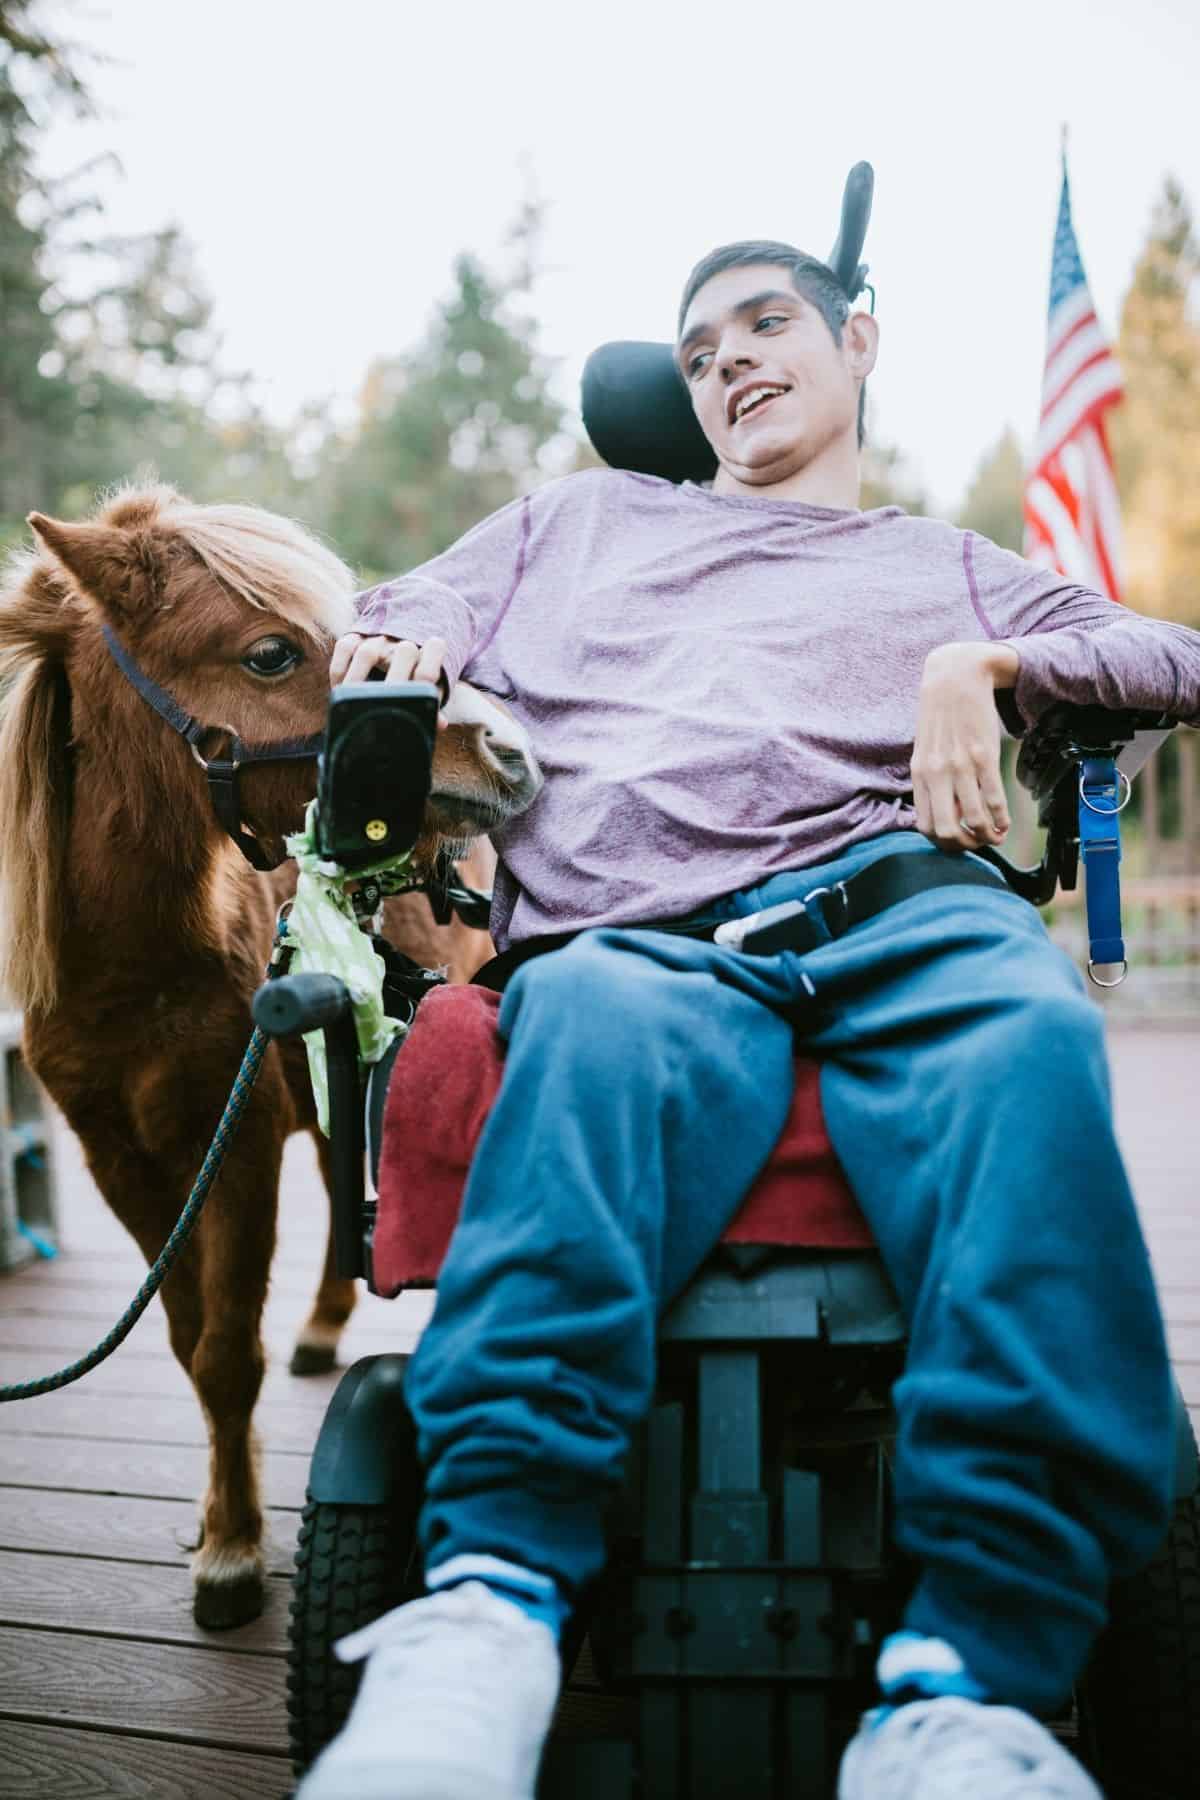 Man in purple shirt in wheelchair by horse